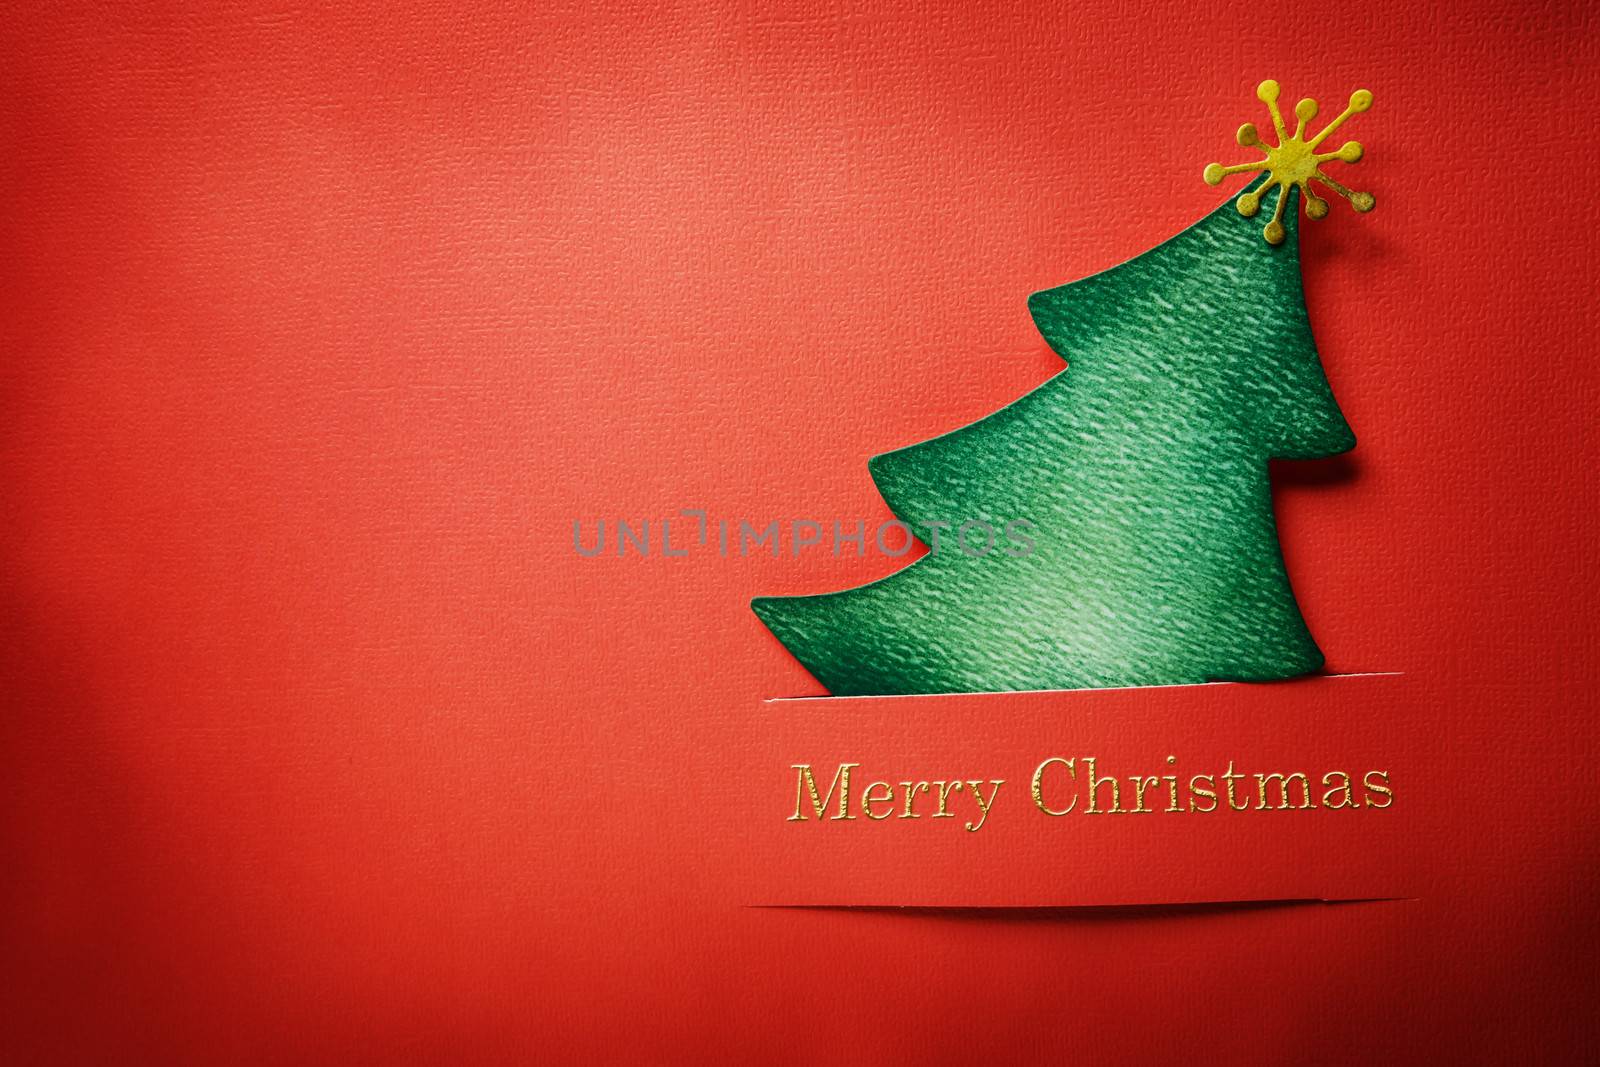 Handmade paper craft Christmas tree with Merry Christmas text